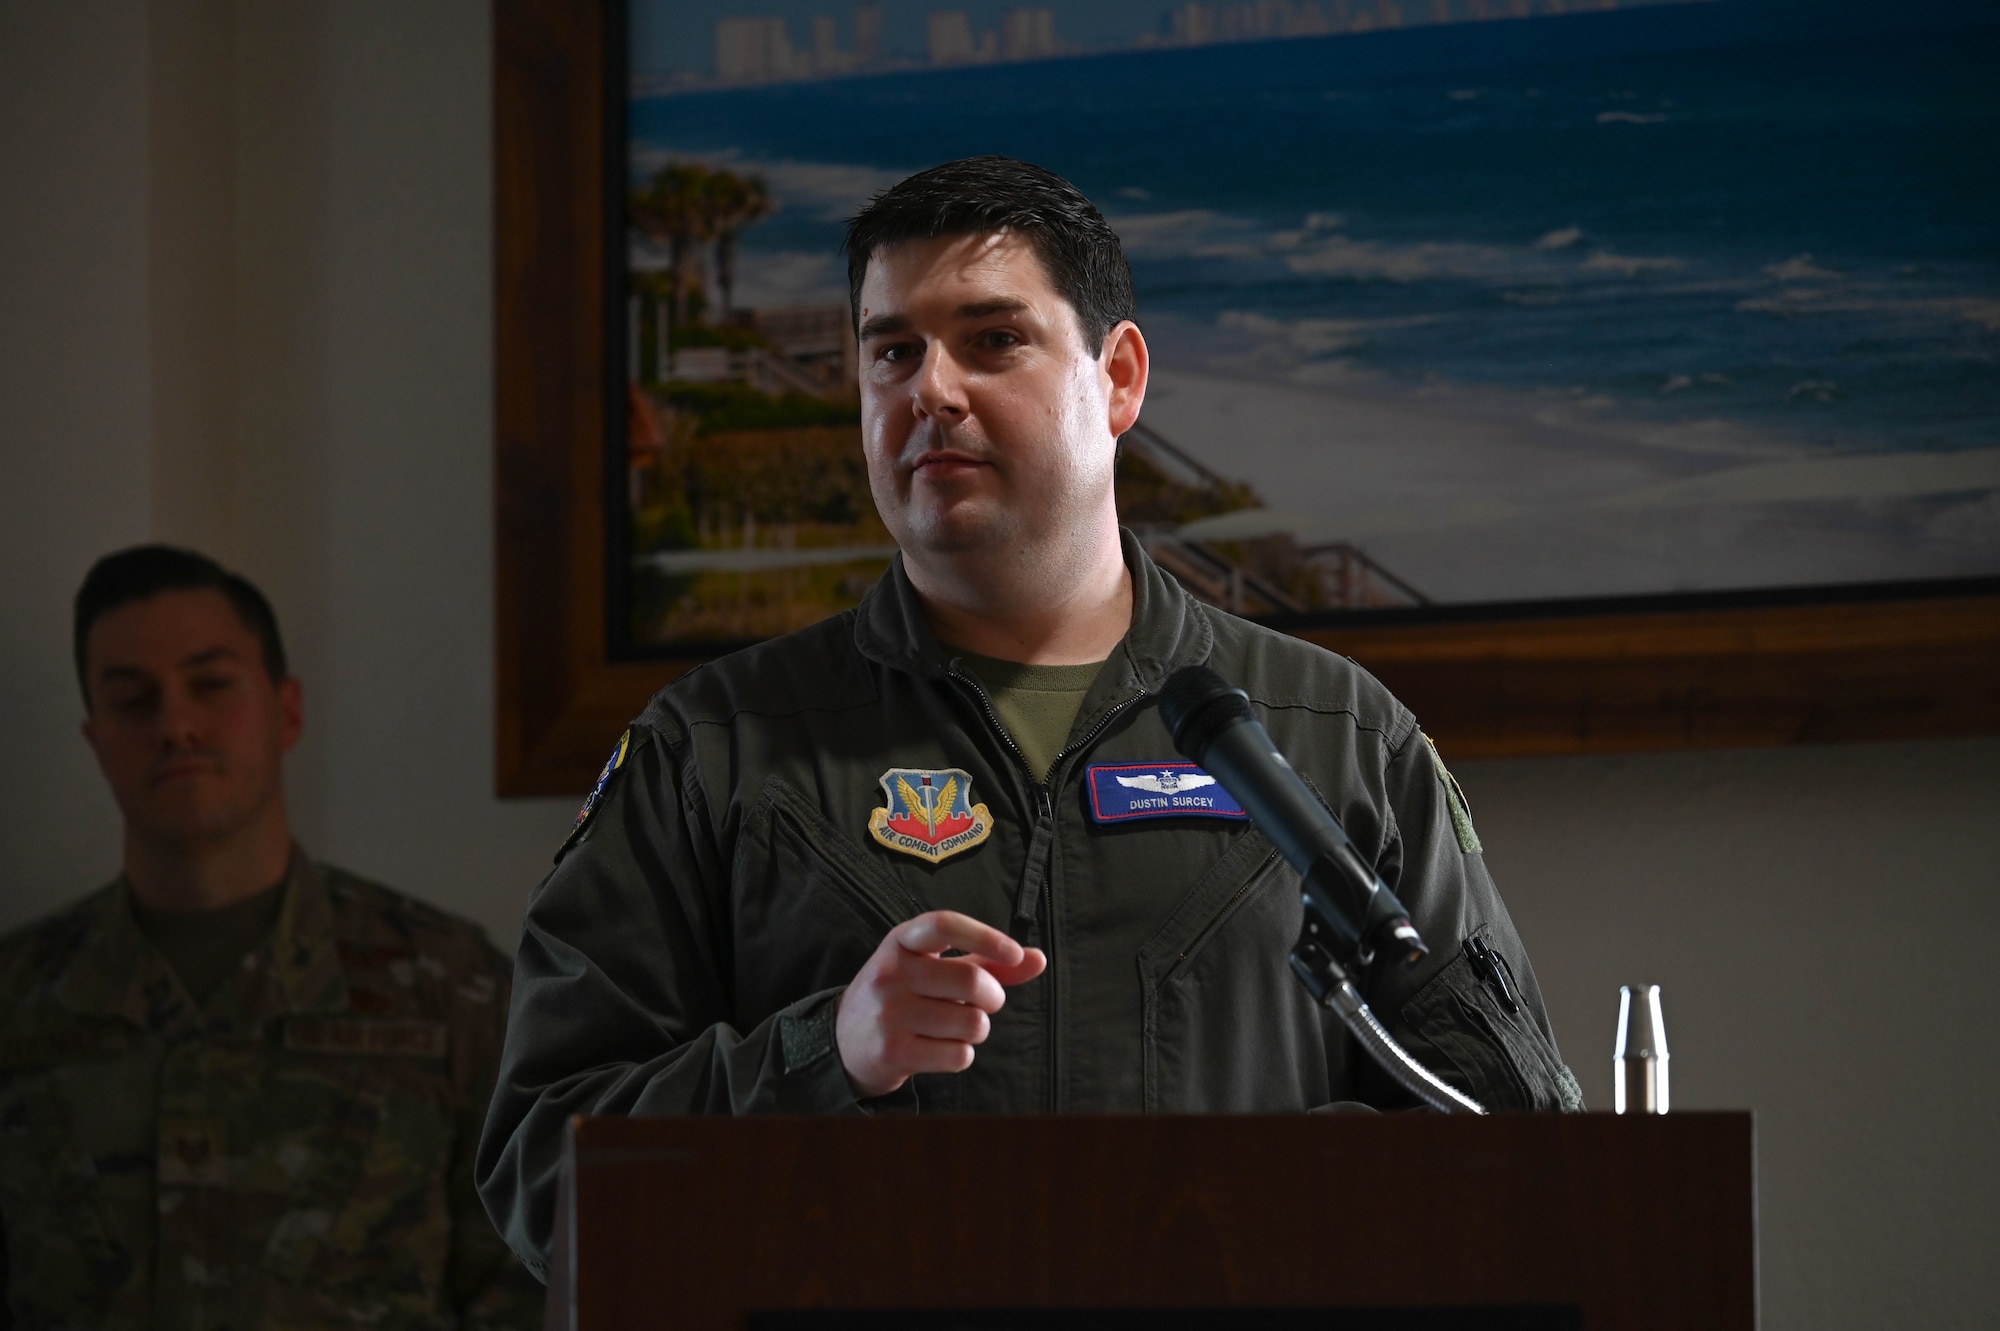 U.S. Air Force Lt. Col. Dustin Surcey, 39th Electronic Warfare Squadron commander, gives remarks after taking command of the 39th EWS at his change of command at Eglin Air Force Base, Fla., Jan. 19, 2024. The 39th EWS provides combat relevant electronic warfare capabilities in support of 9 combatant commands and over 70 electronic warfare systems. (U.S. Air Force photo by Capt. Benjamin Aronson)